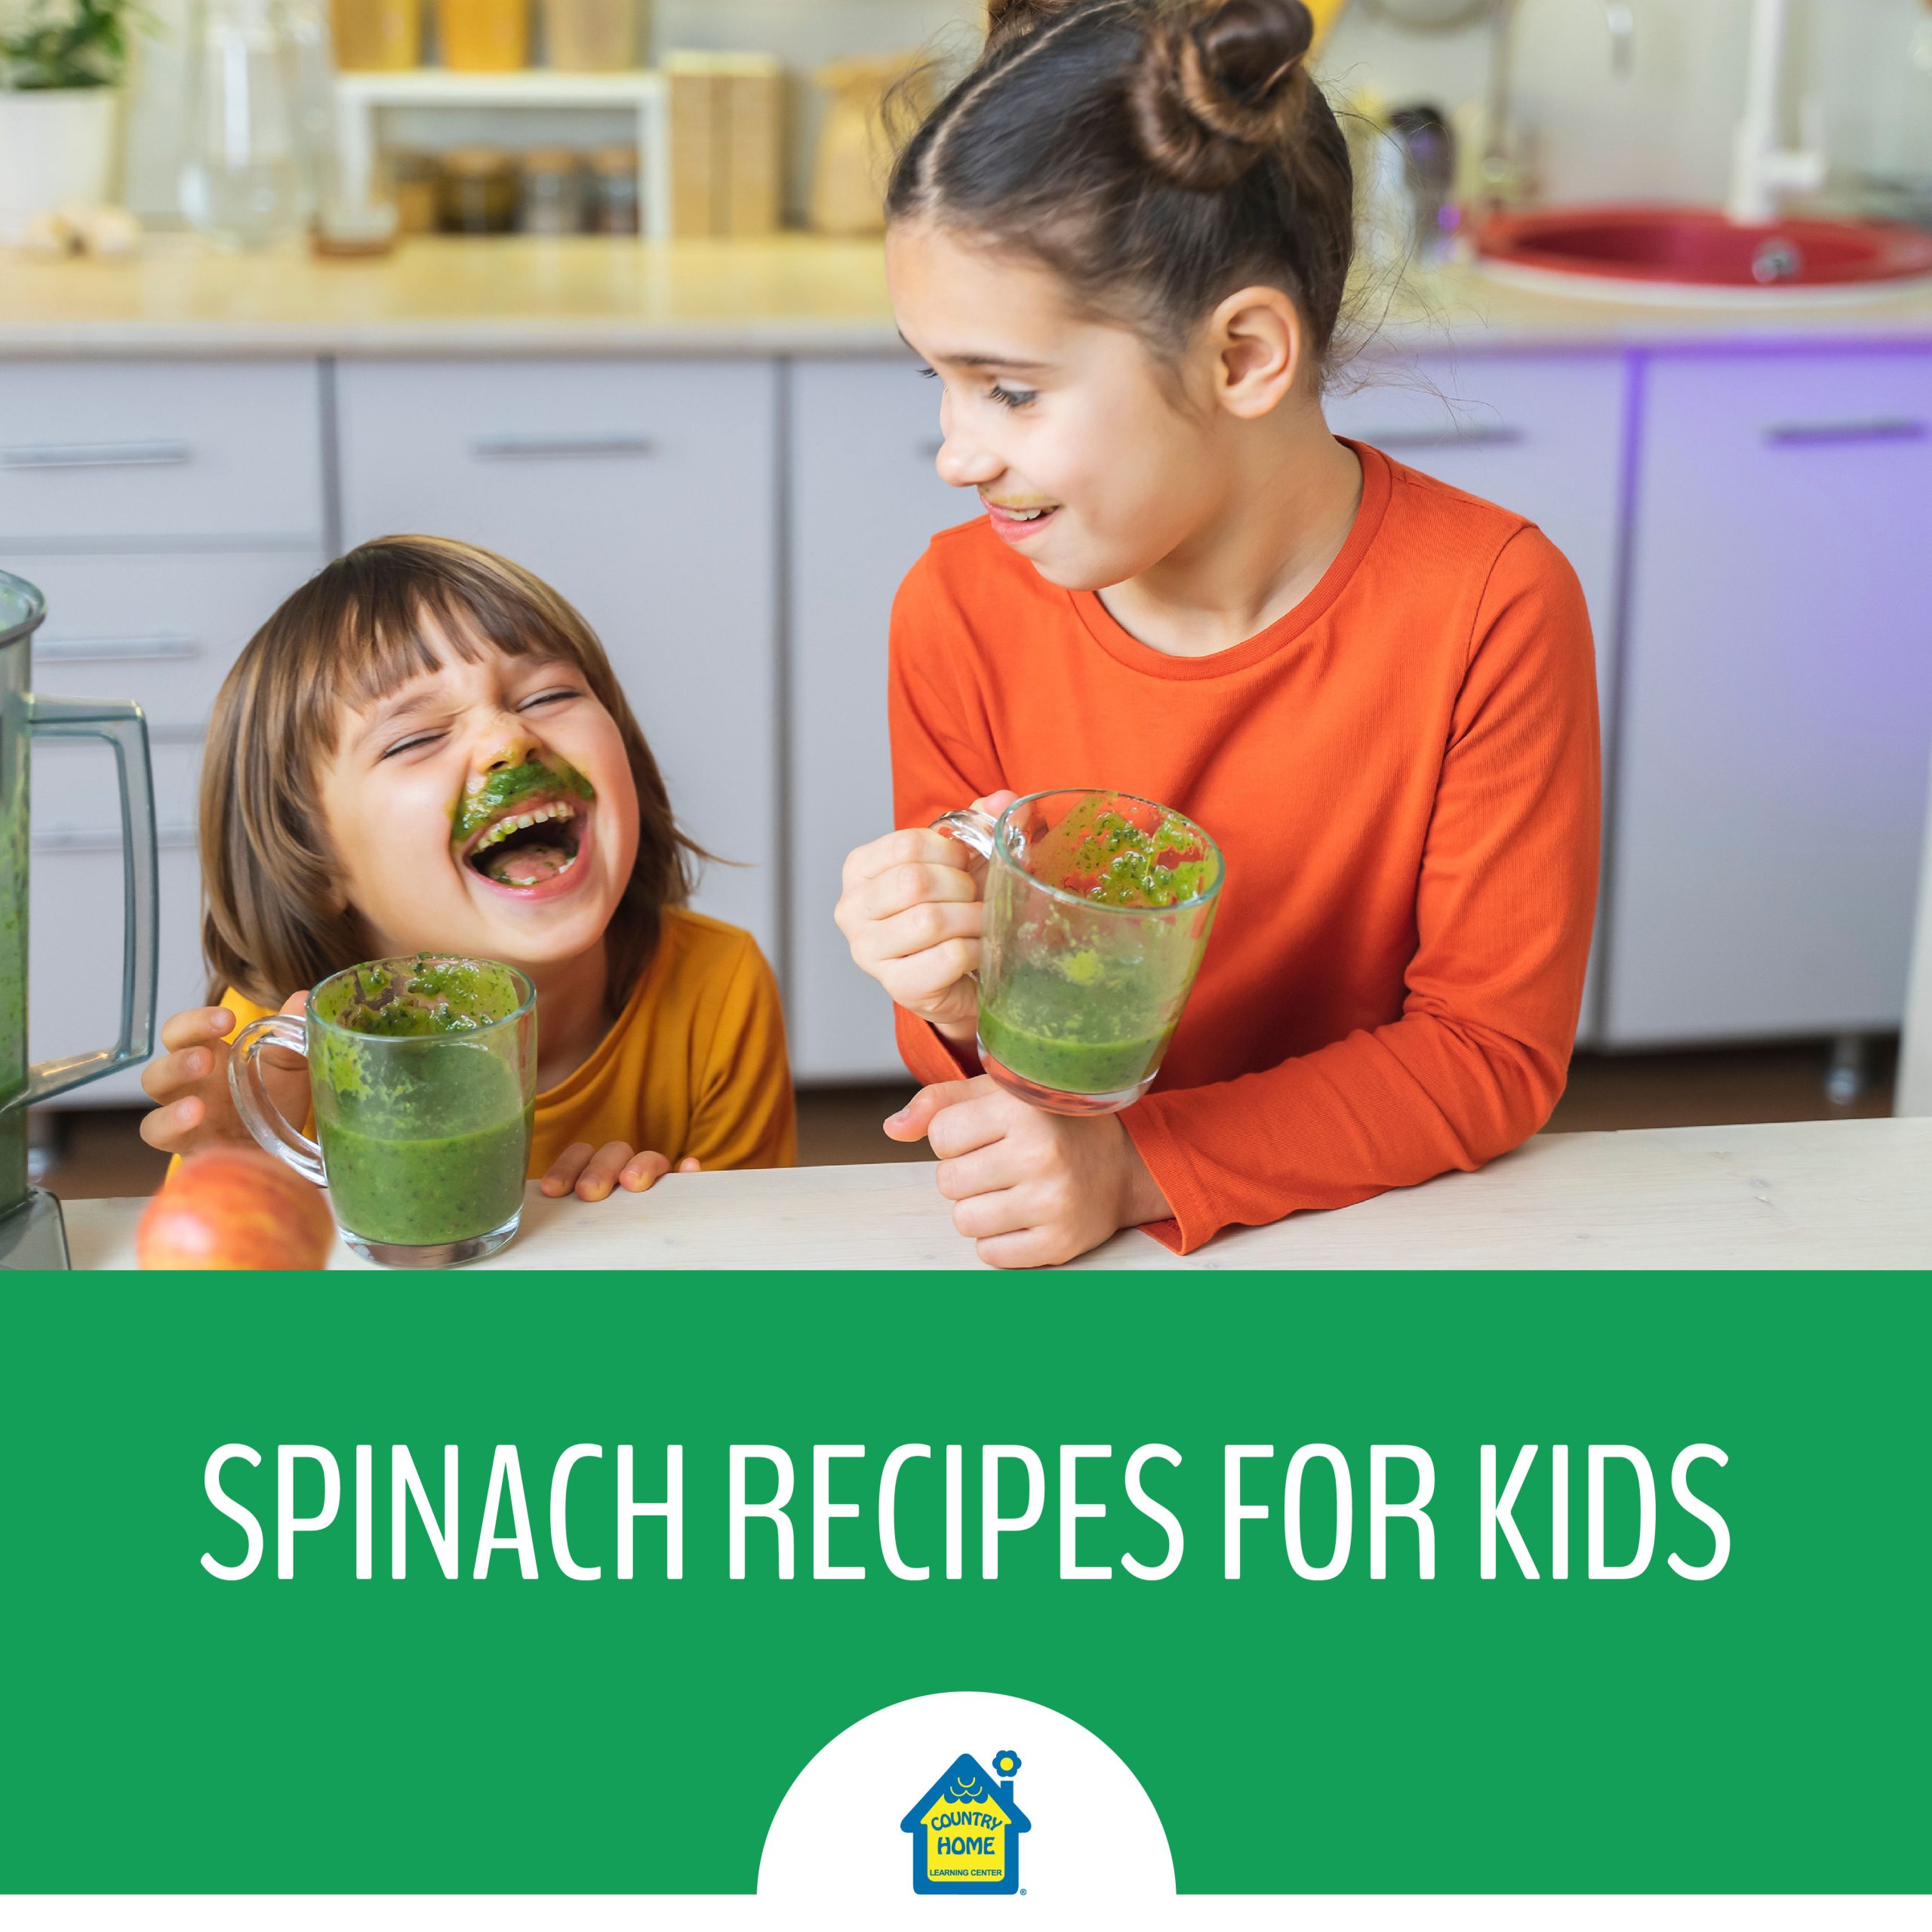 Spinach Recipes for Kids